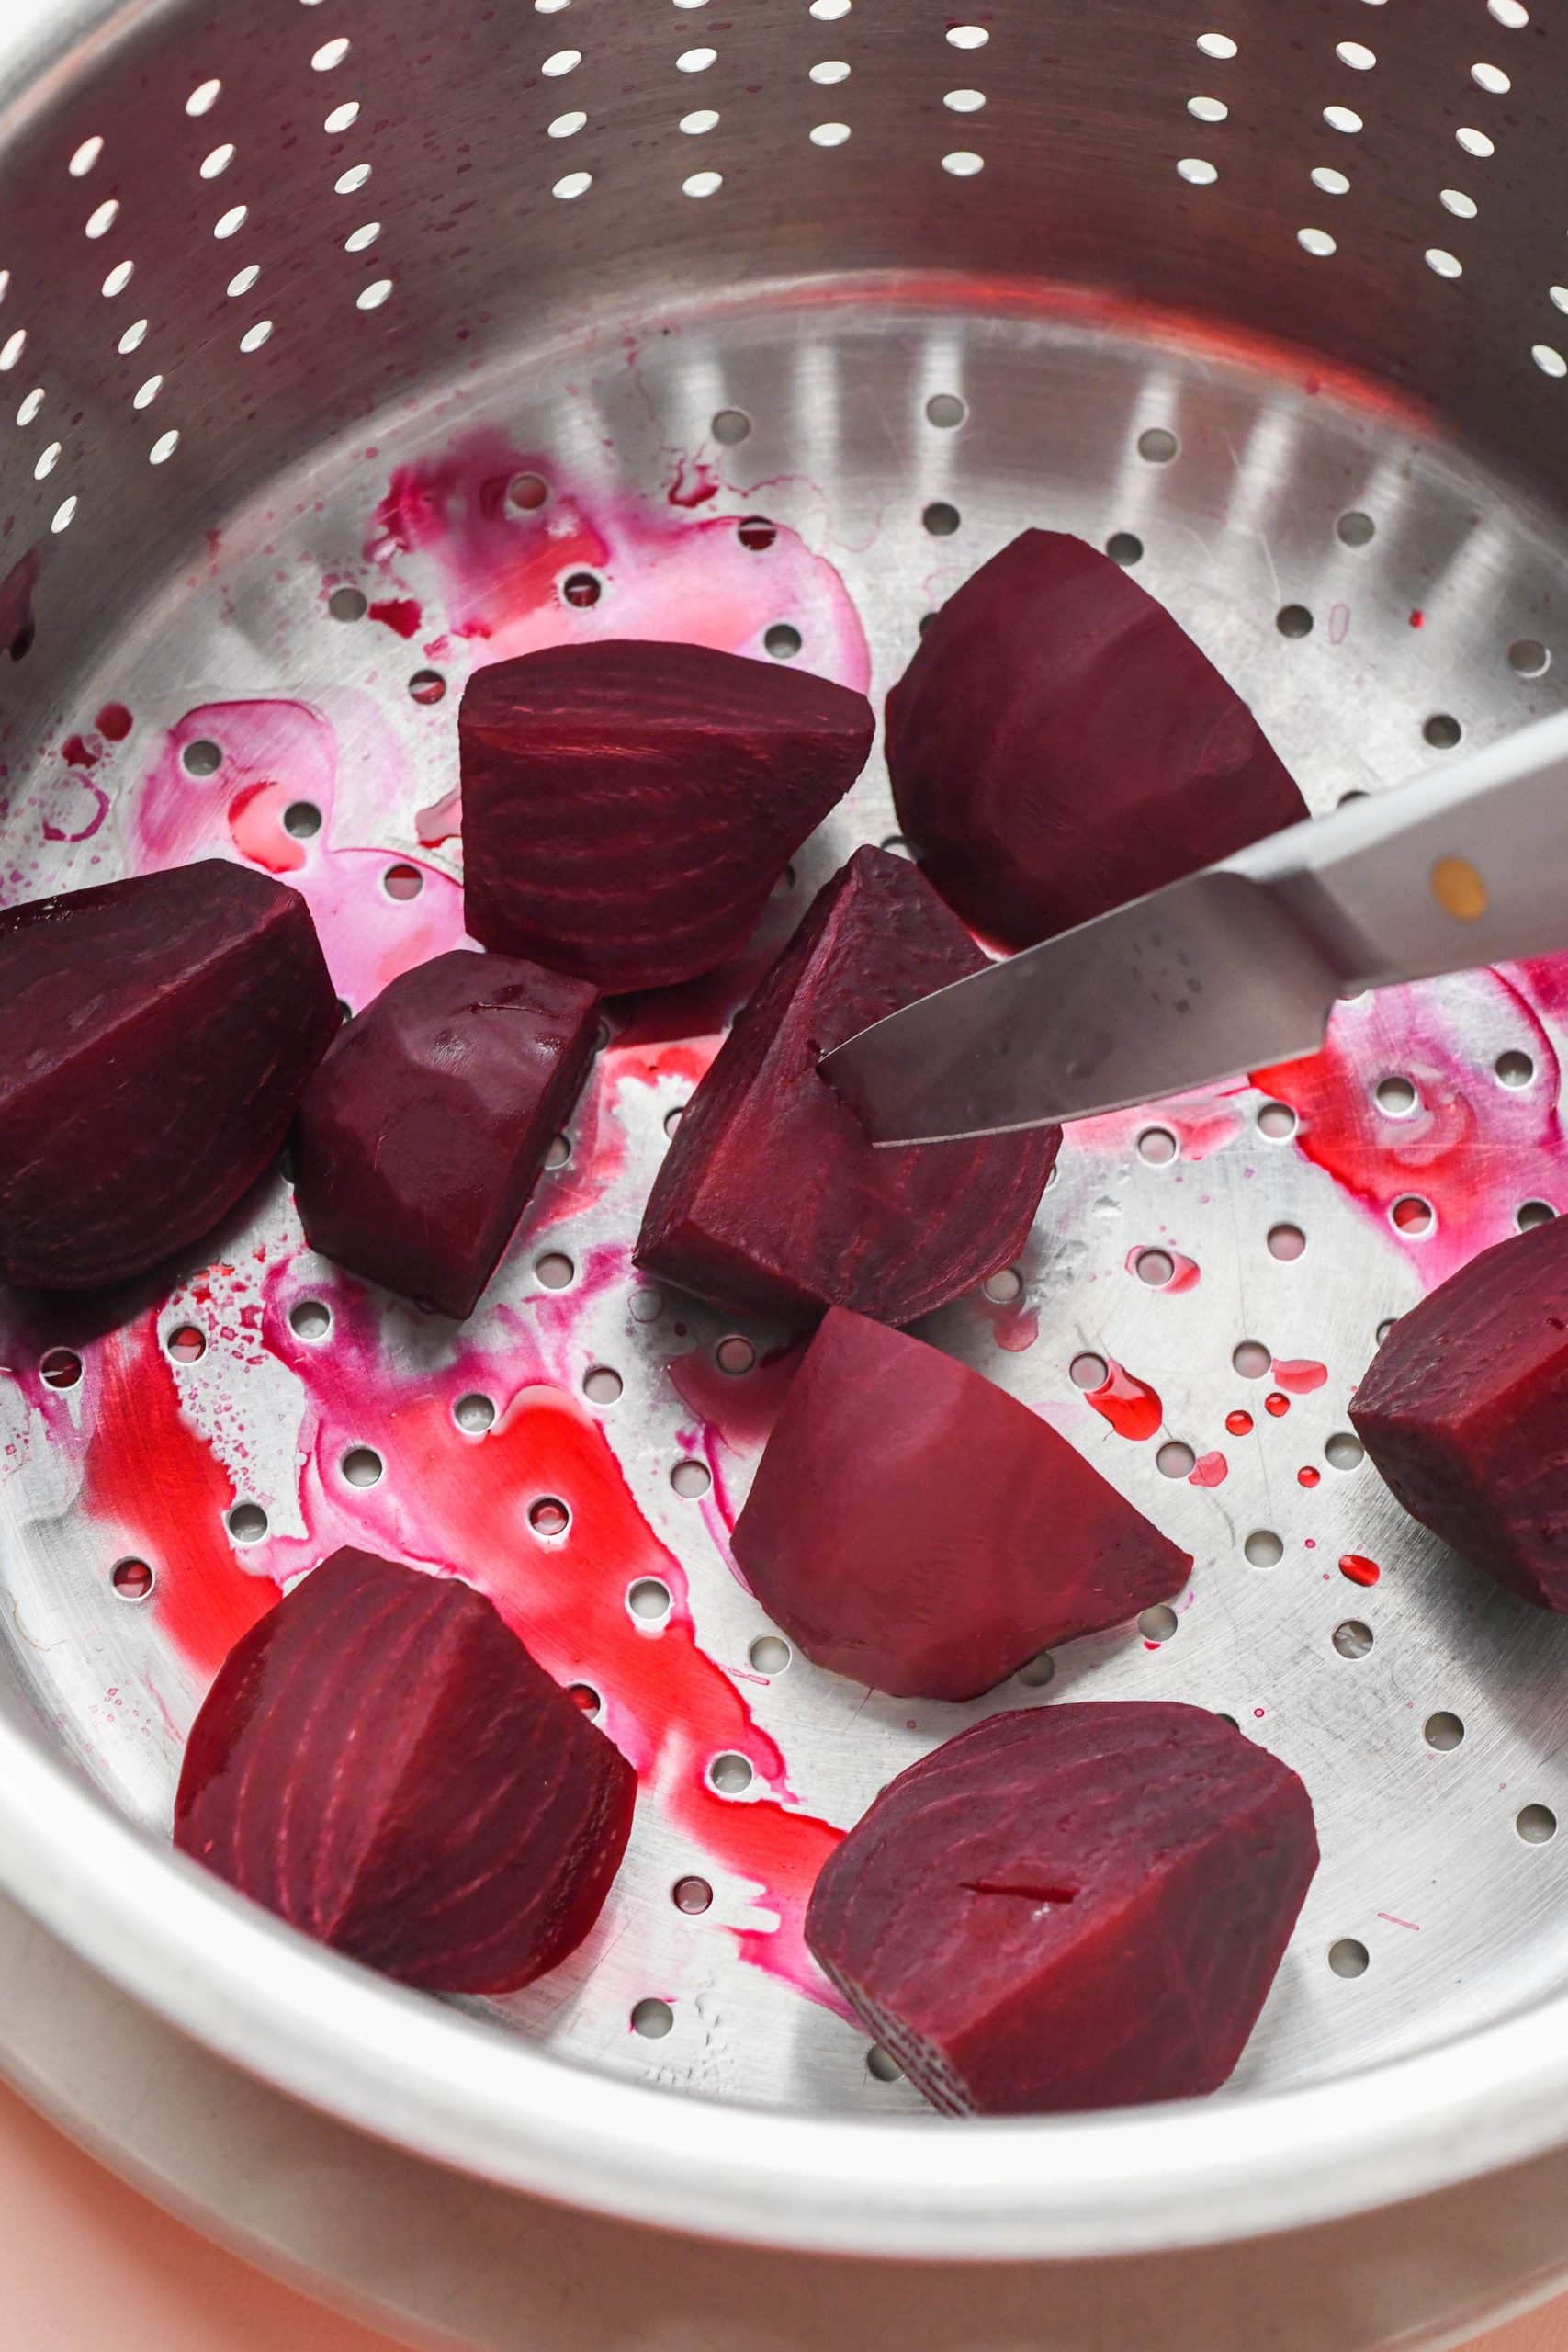 How to make cashew beet dip: Beets in a steamer basket.